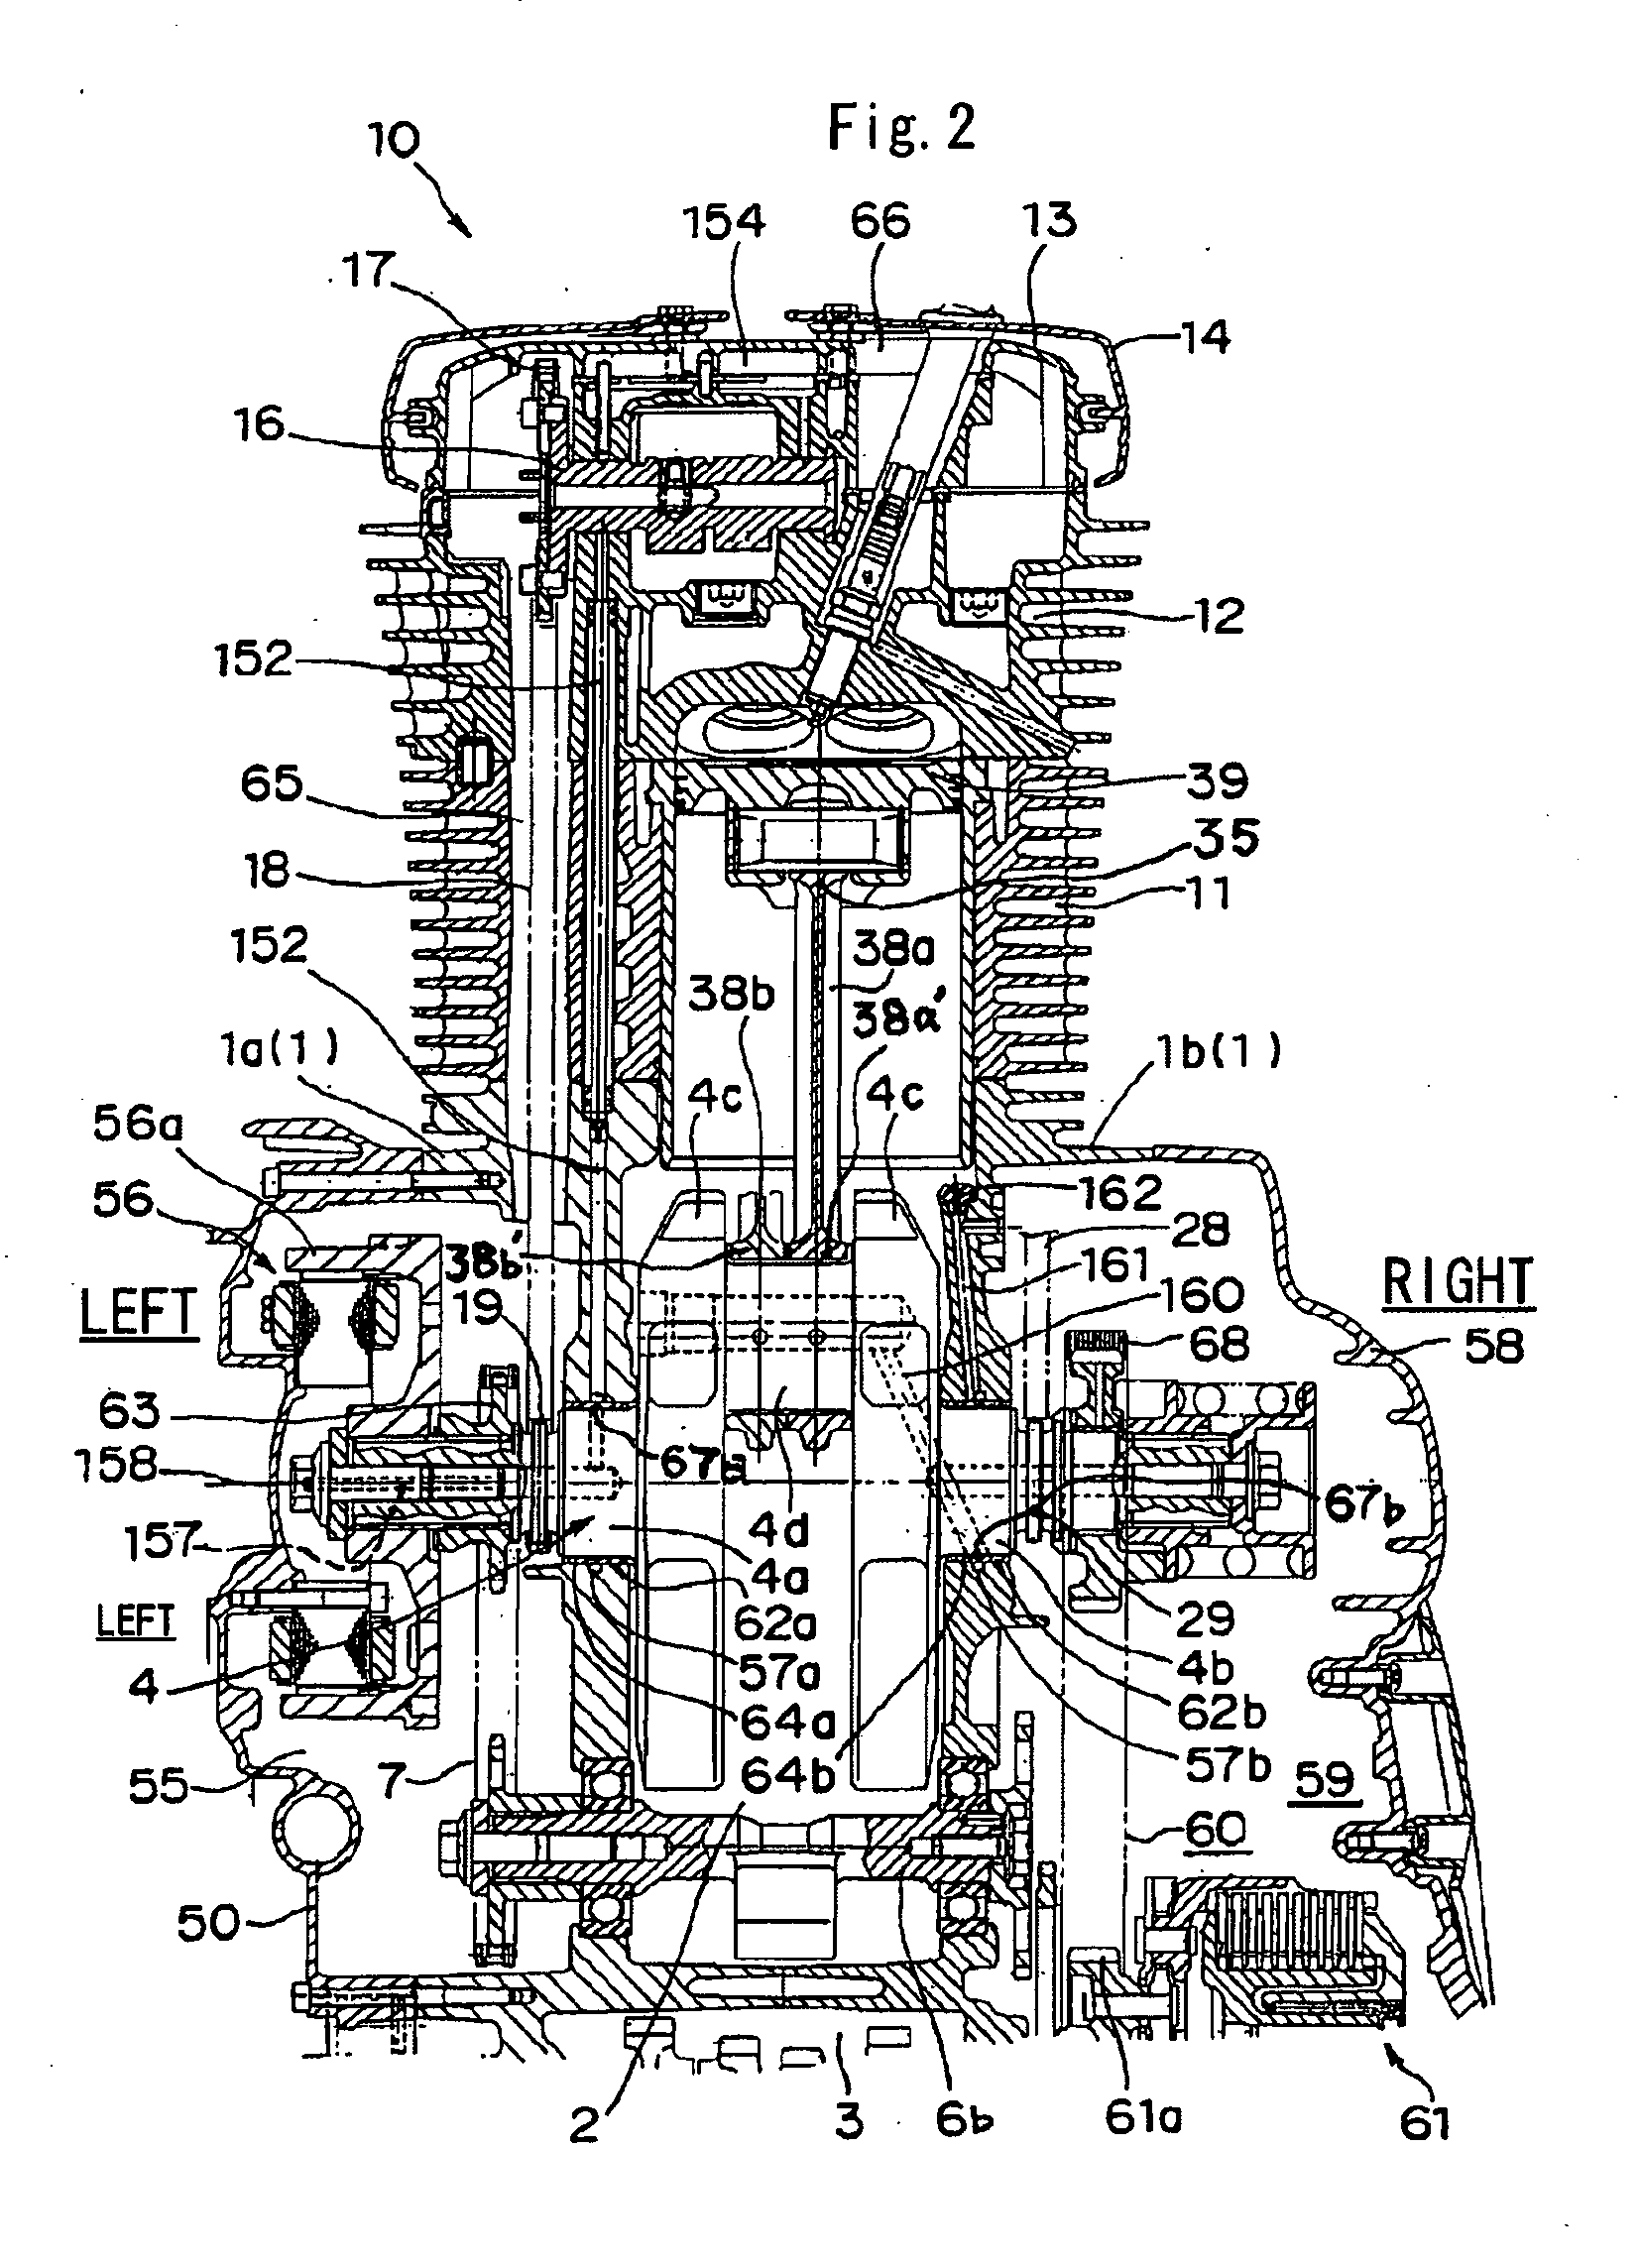 Lubricant structure of engine